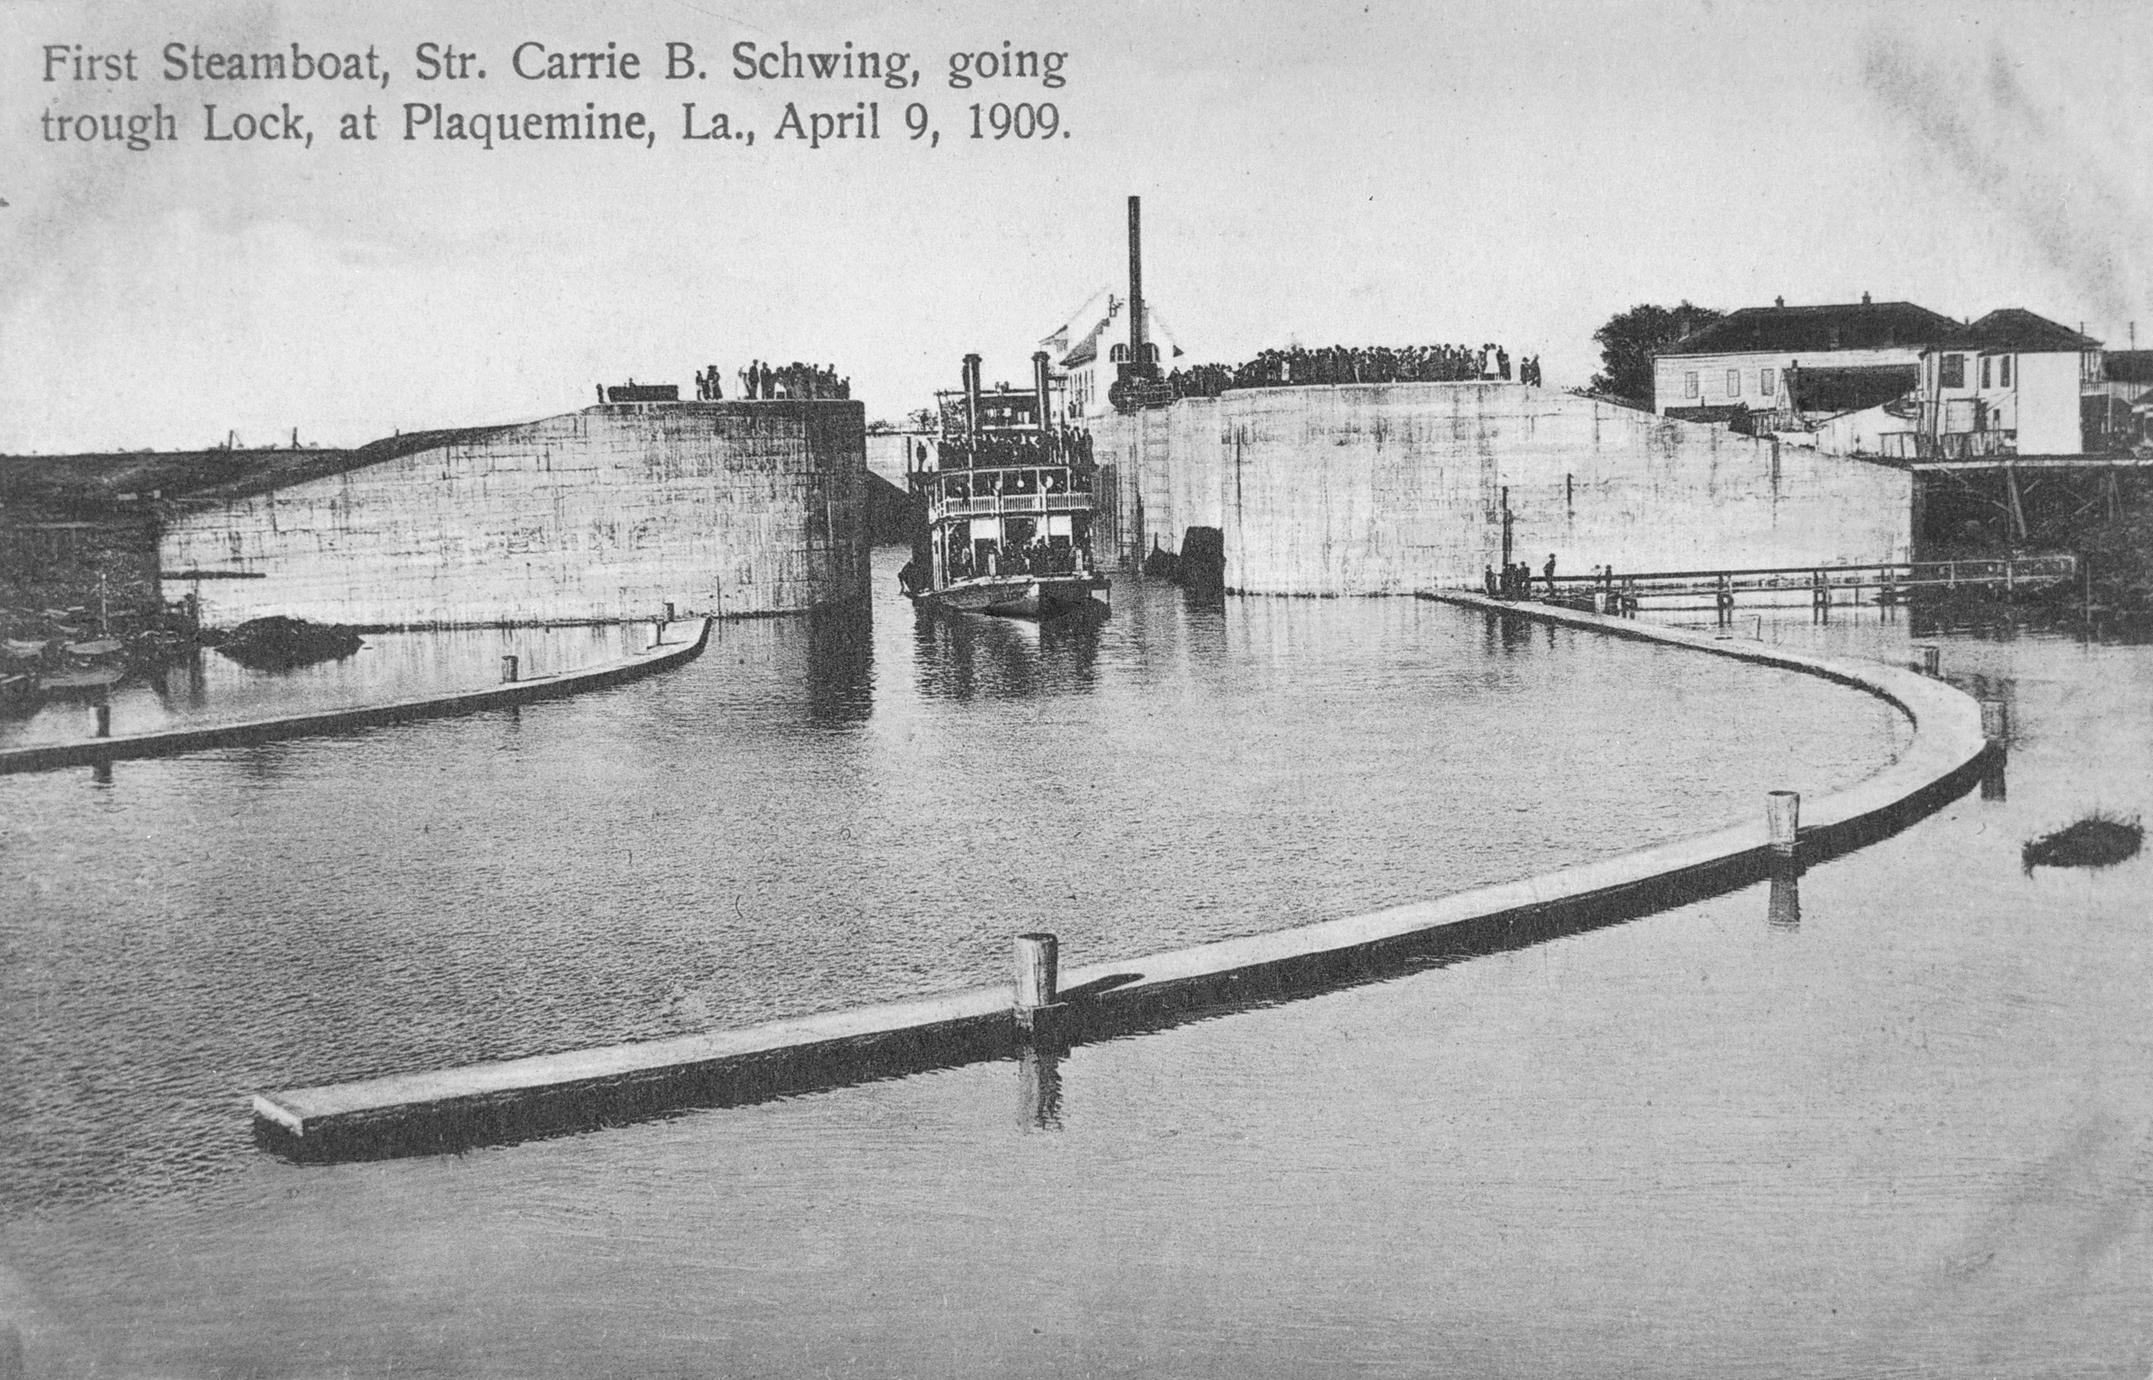 Carrie B. Schwing (Packet/Towboat, 1904-1912)